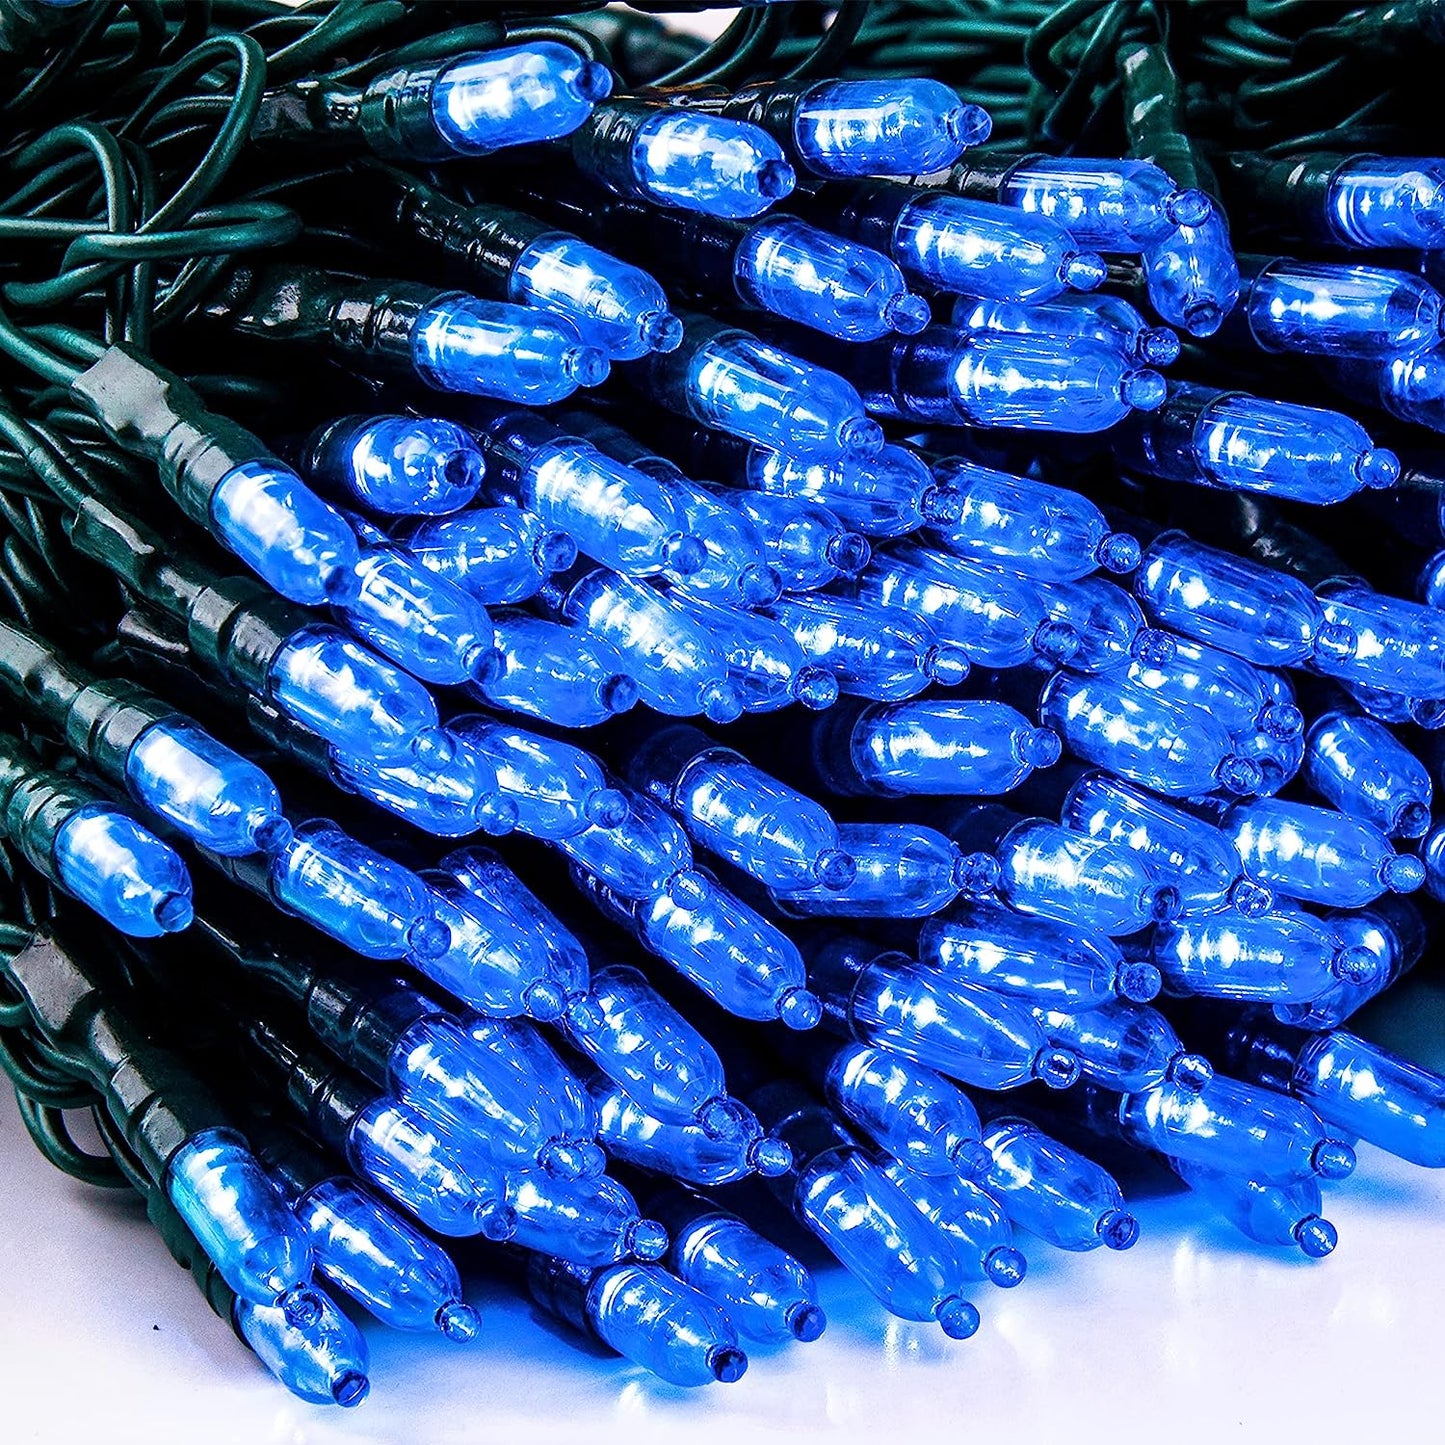 2 Set of 100 Count Blue LED Green Wire String Lights